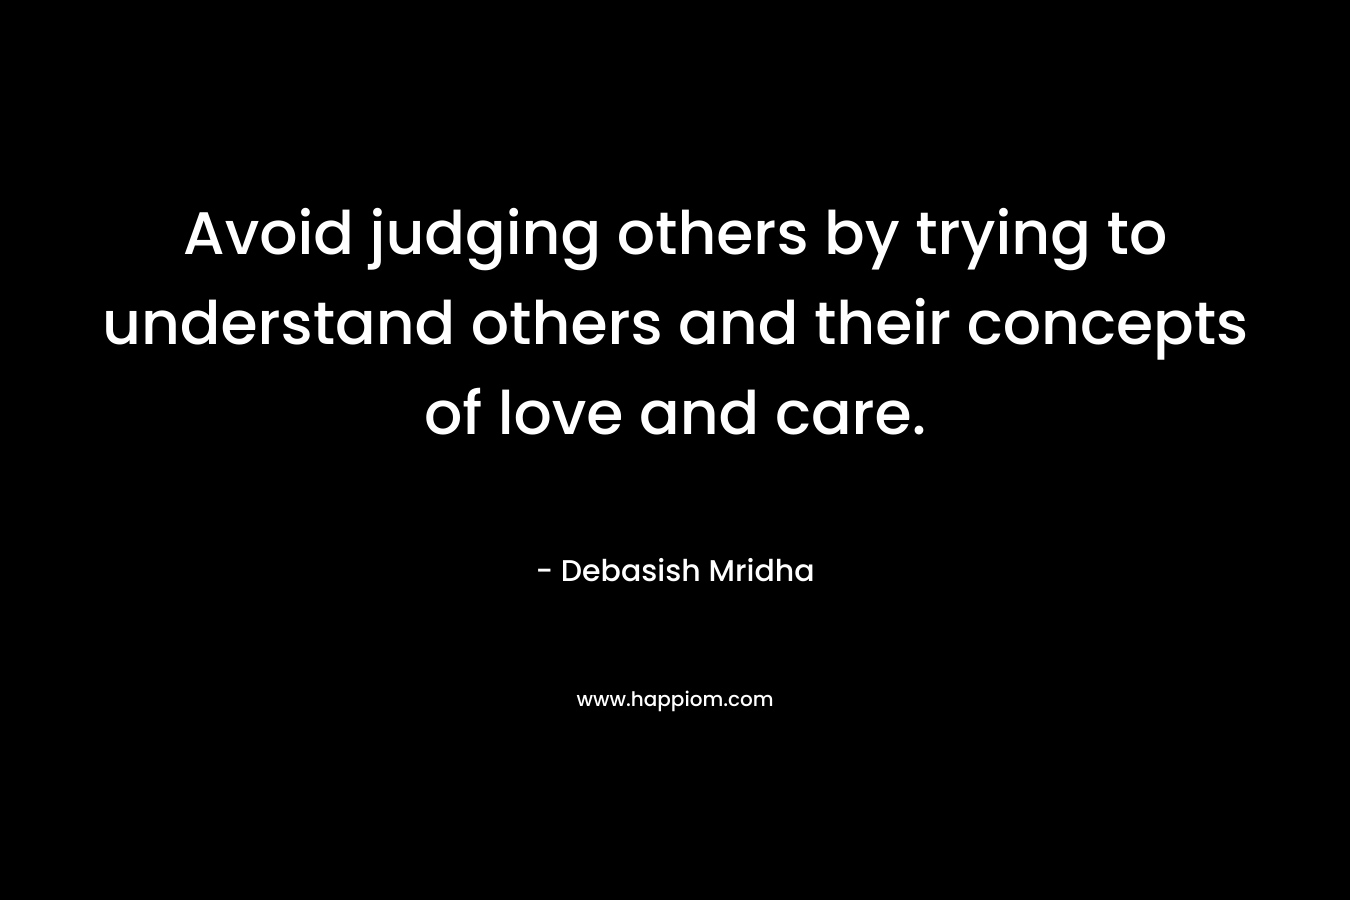 Avoid judging others by trying to understand others and their concepts of love and care.